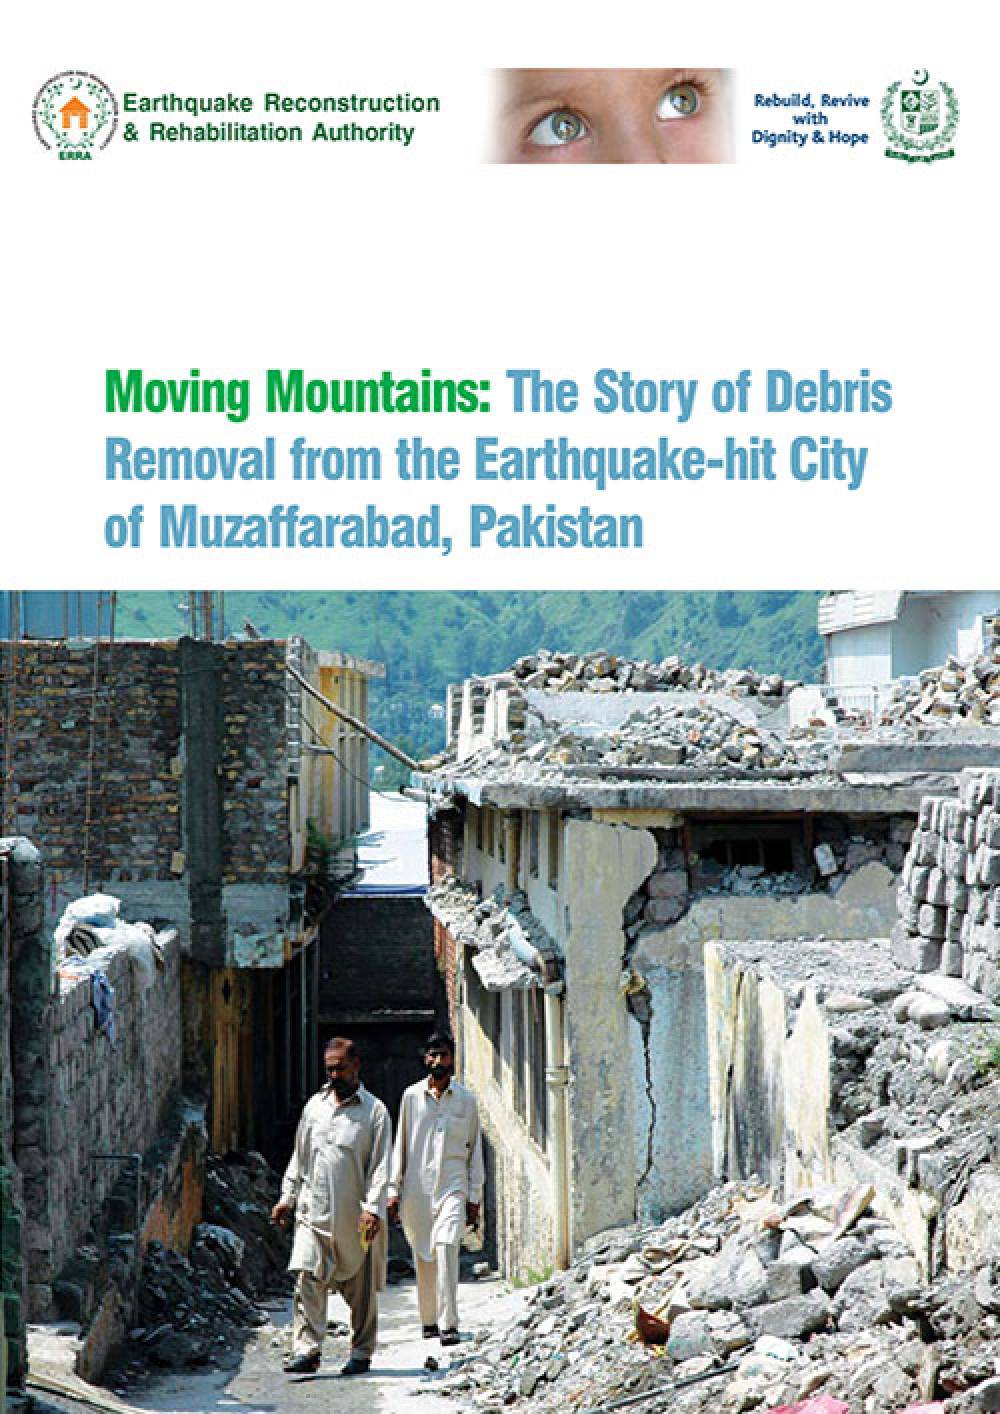 Moving Mountains The Story of Debris Removal from the Earthquake-hit City of Muzaffarabad